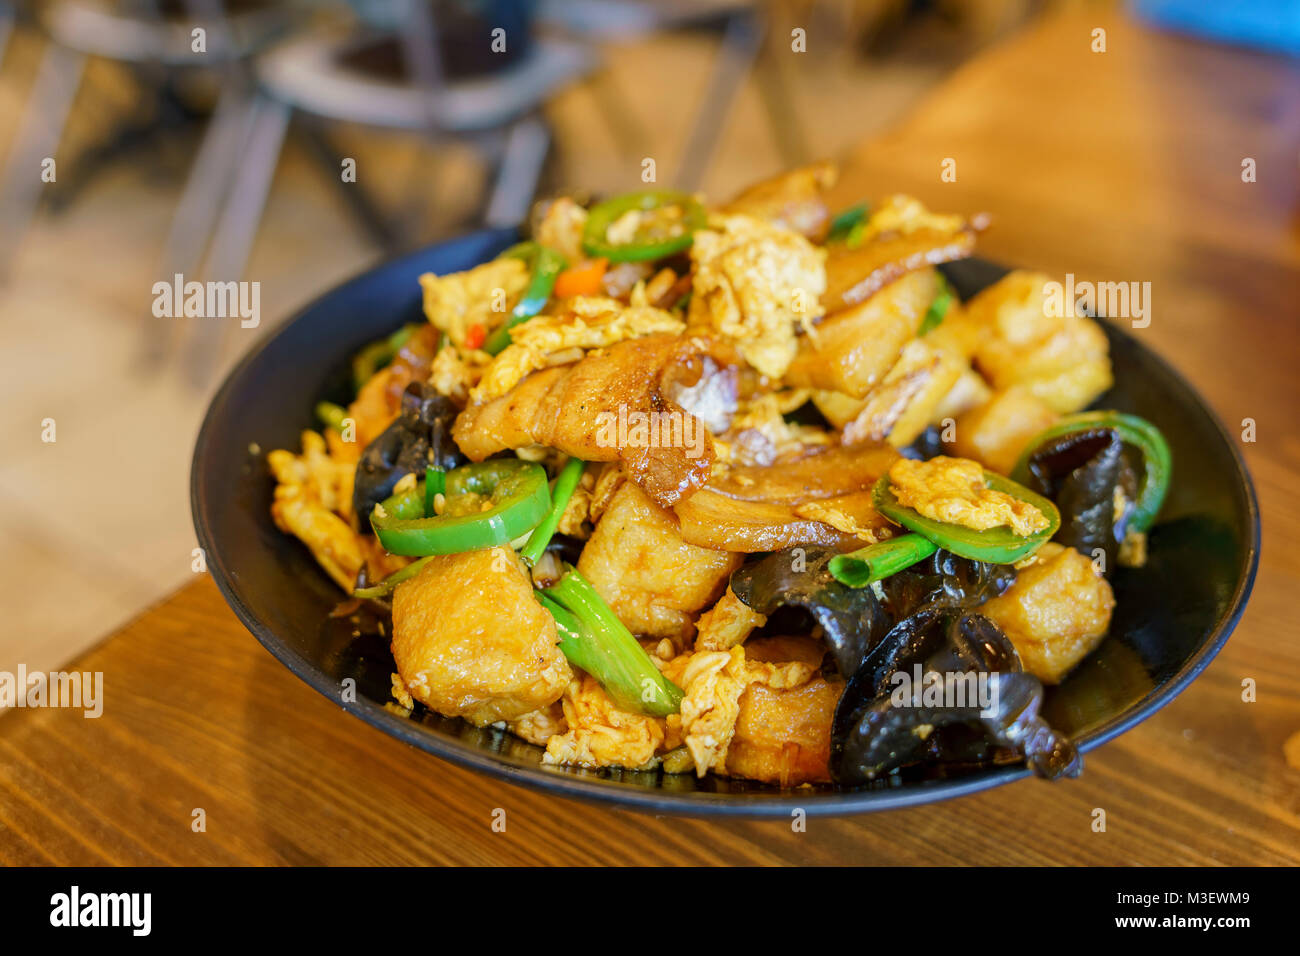 Close up shot of a Asian style dish of fry porks, egg, vegtables, ate at Los Angeles Stock Photo